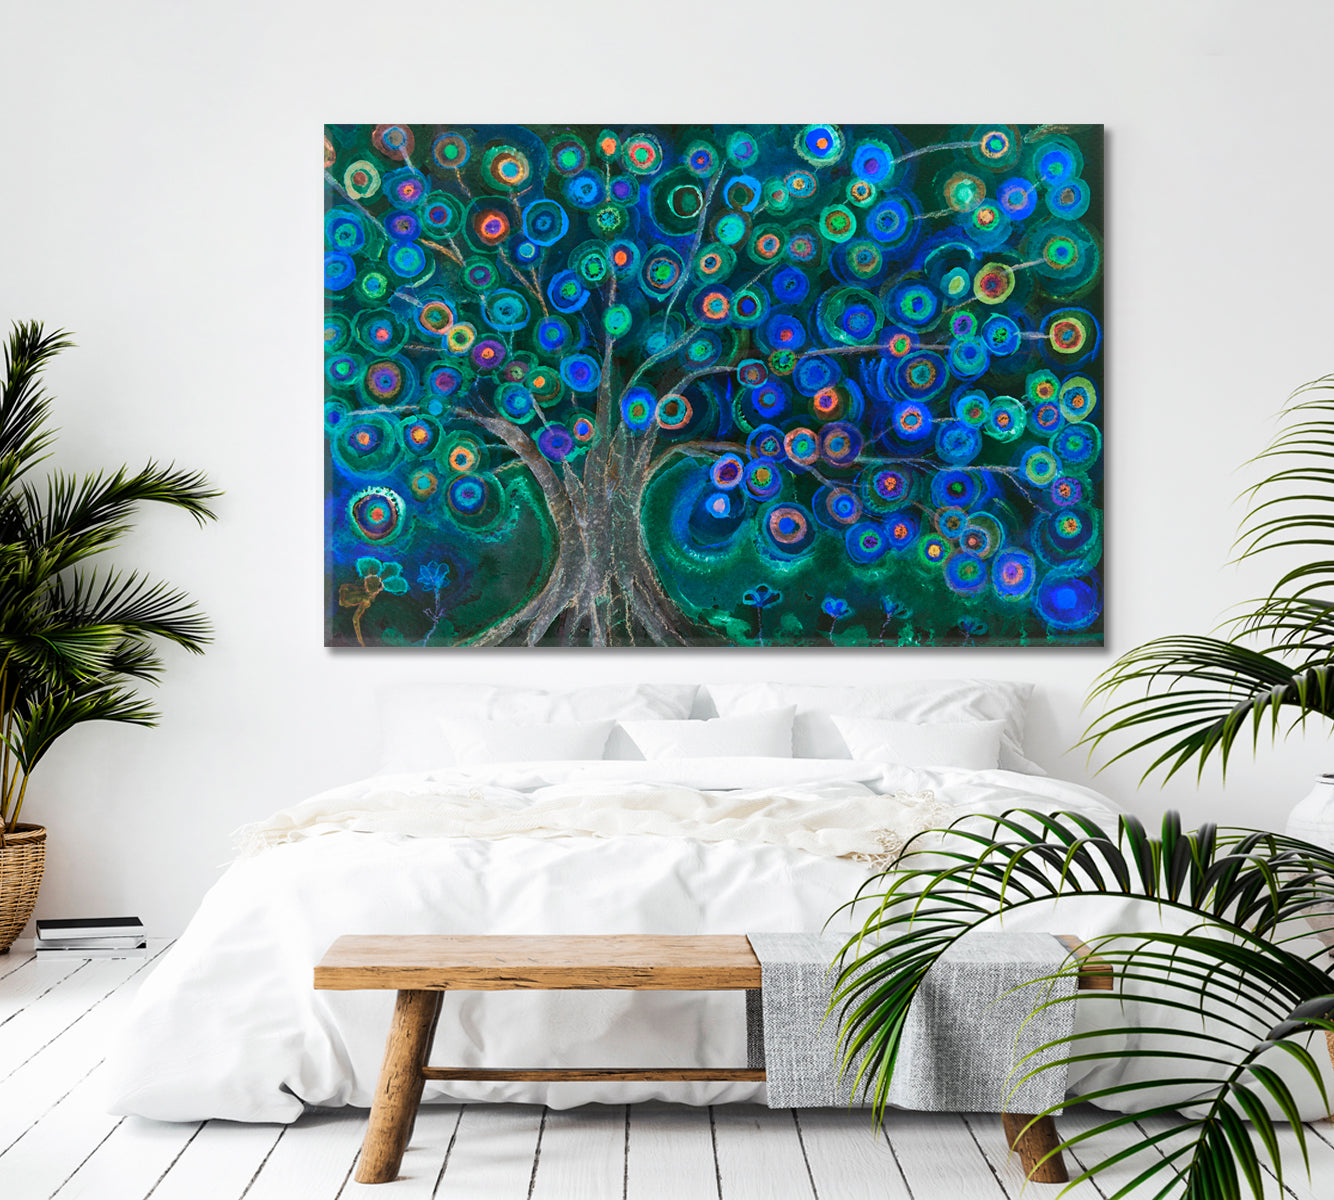 Lollipops Tree At Night Nature Wall Canvas Print Artesty 1 panel 24" x 16" 